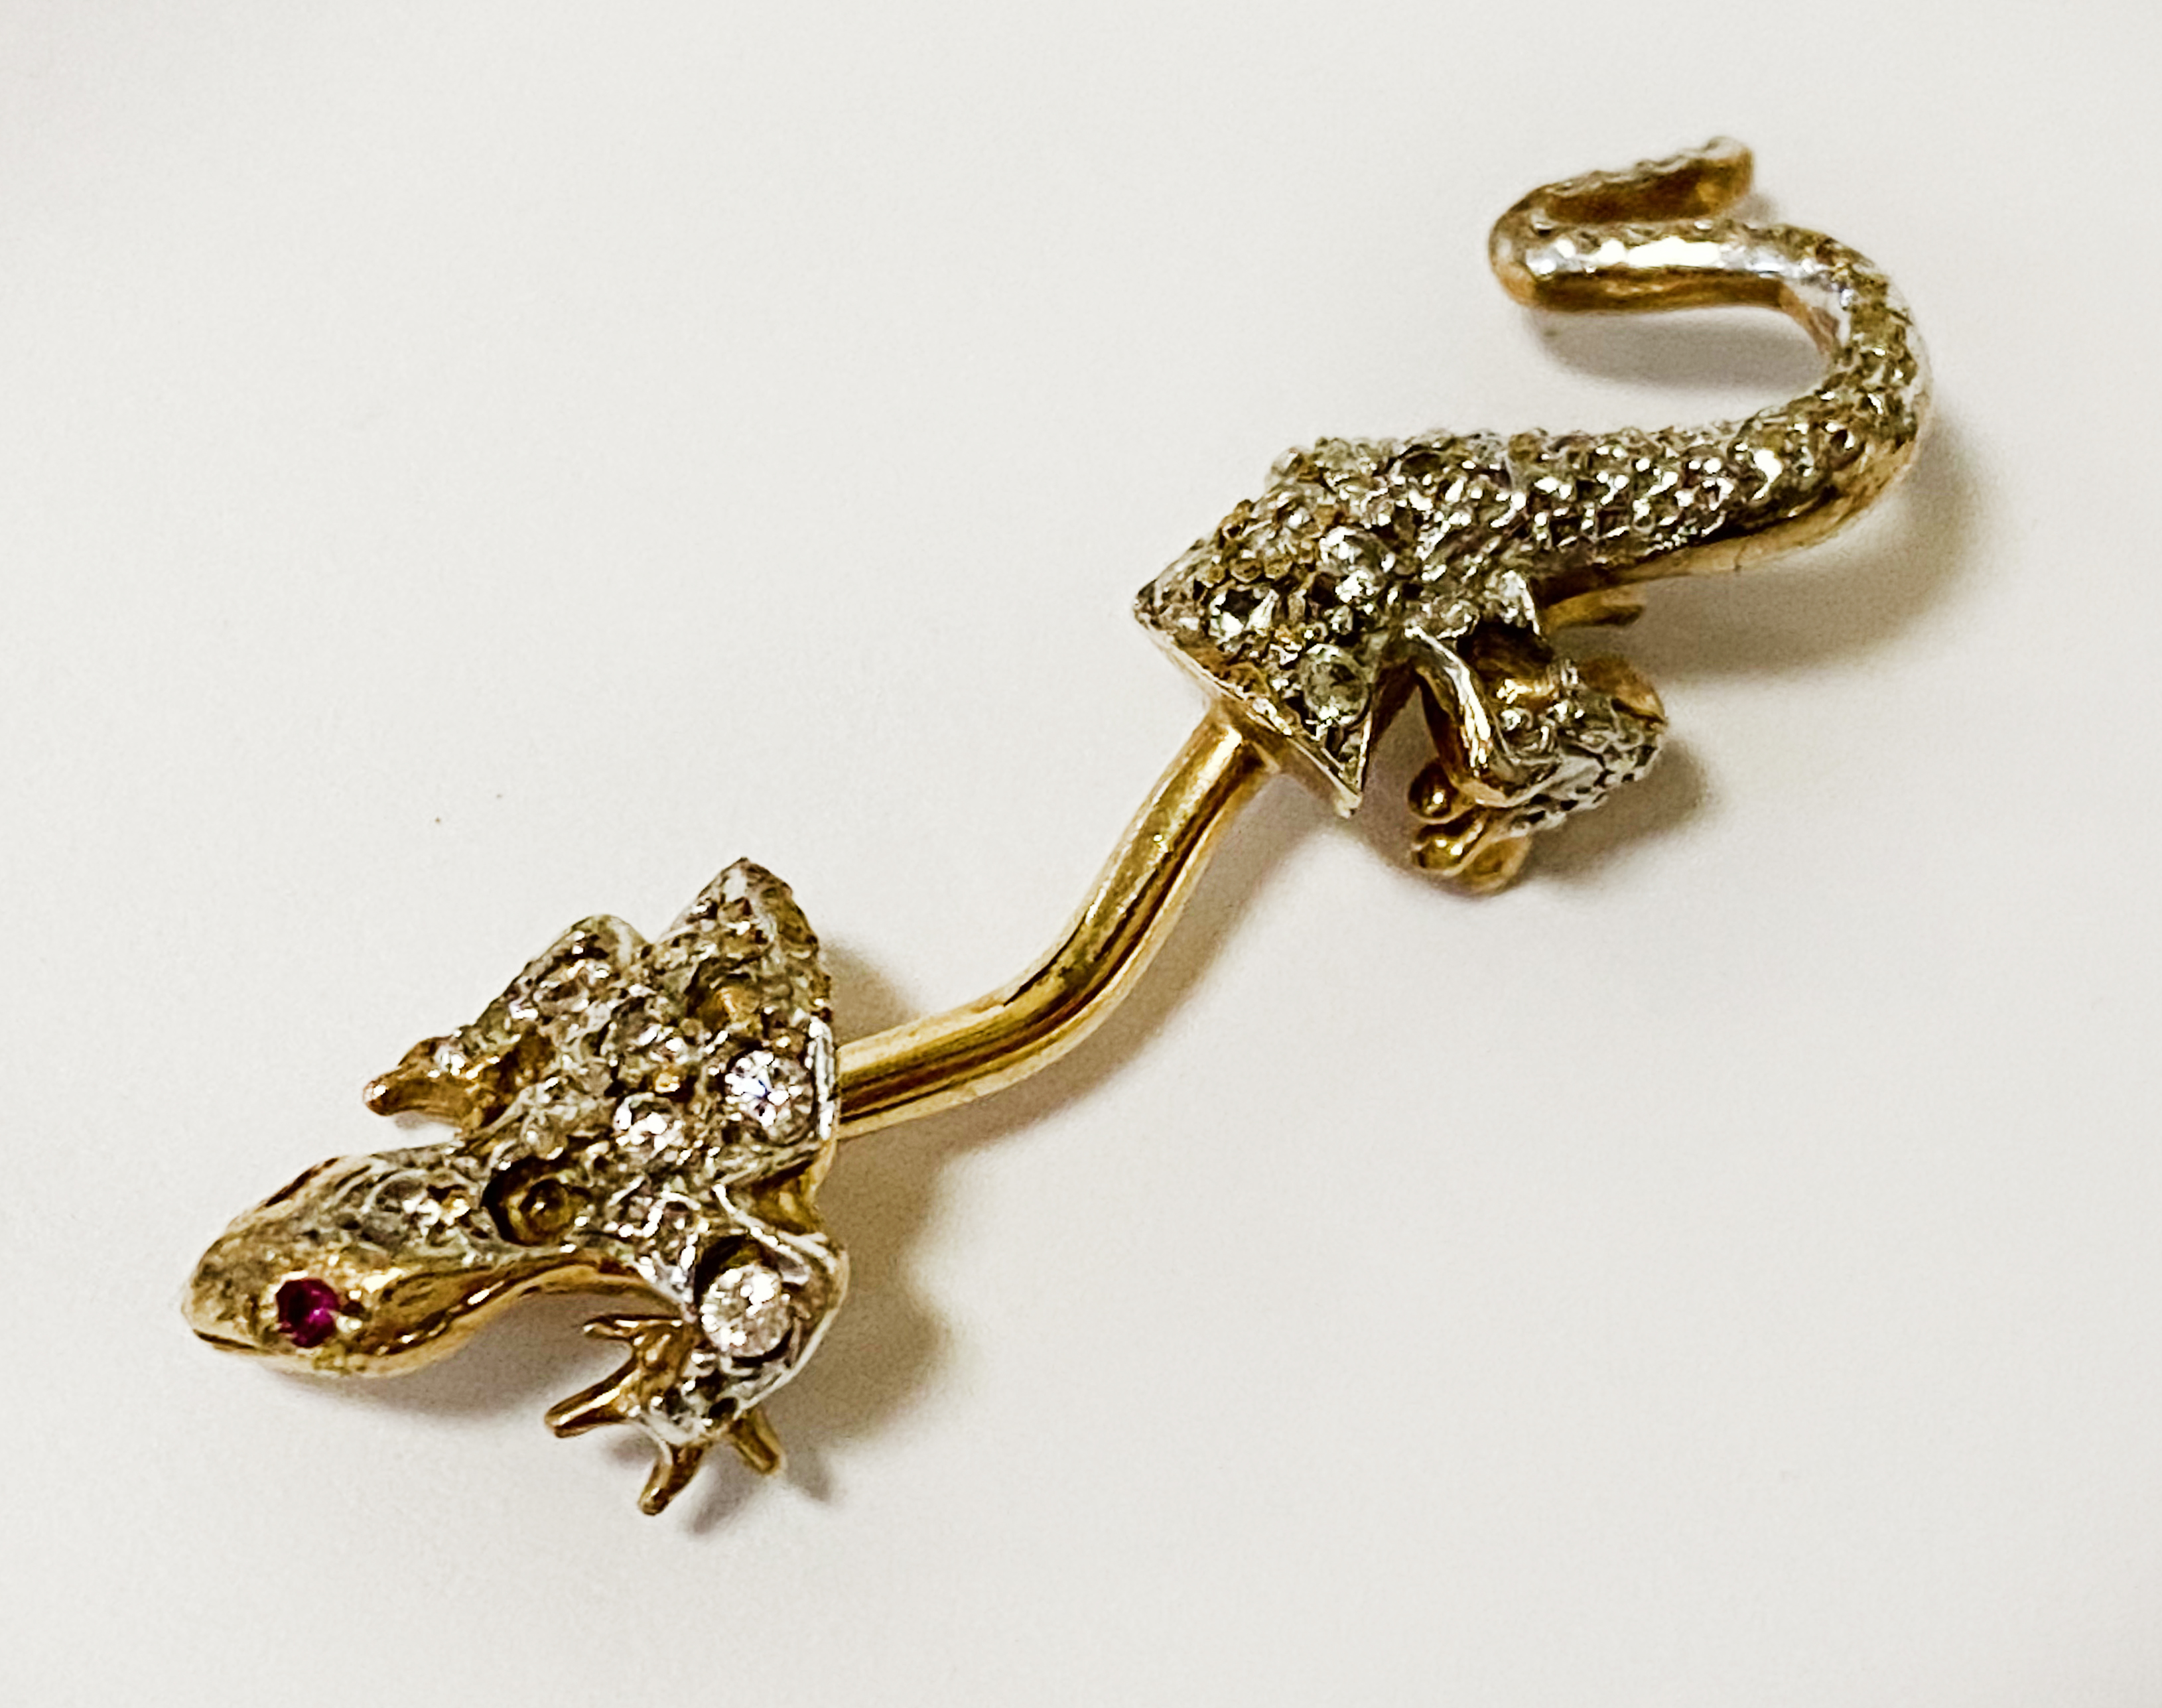 9CT GOLD LIZARD WITH DIAMOND & RUBY EYES 3.5 GRAMS APPROX